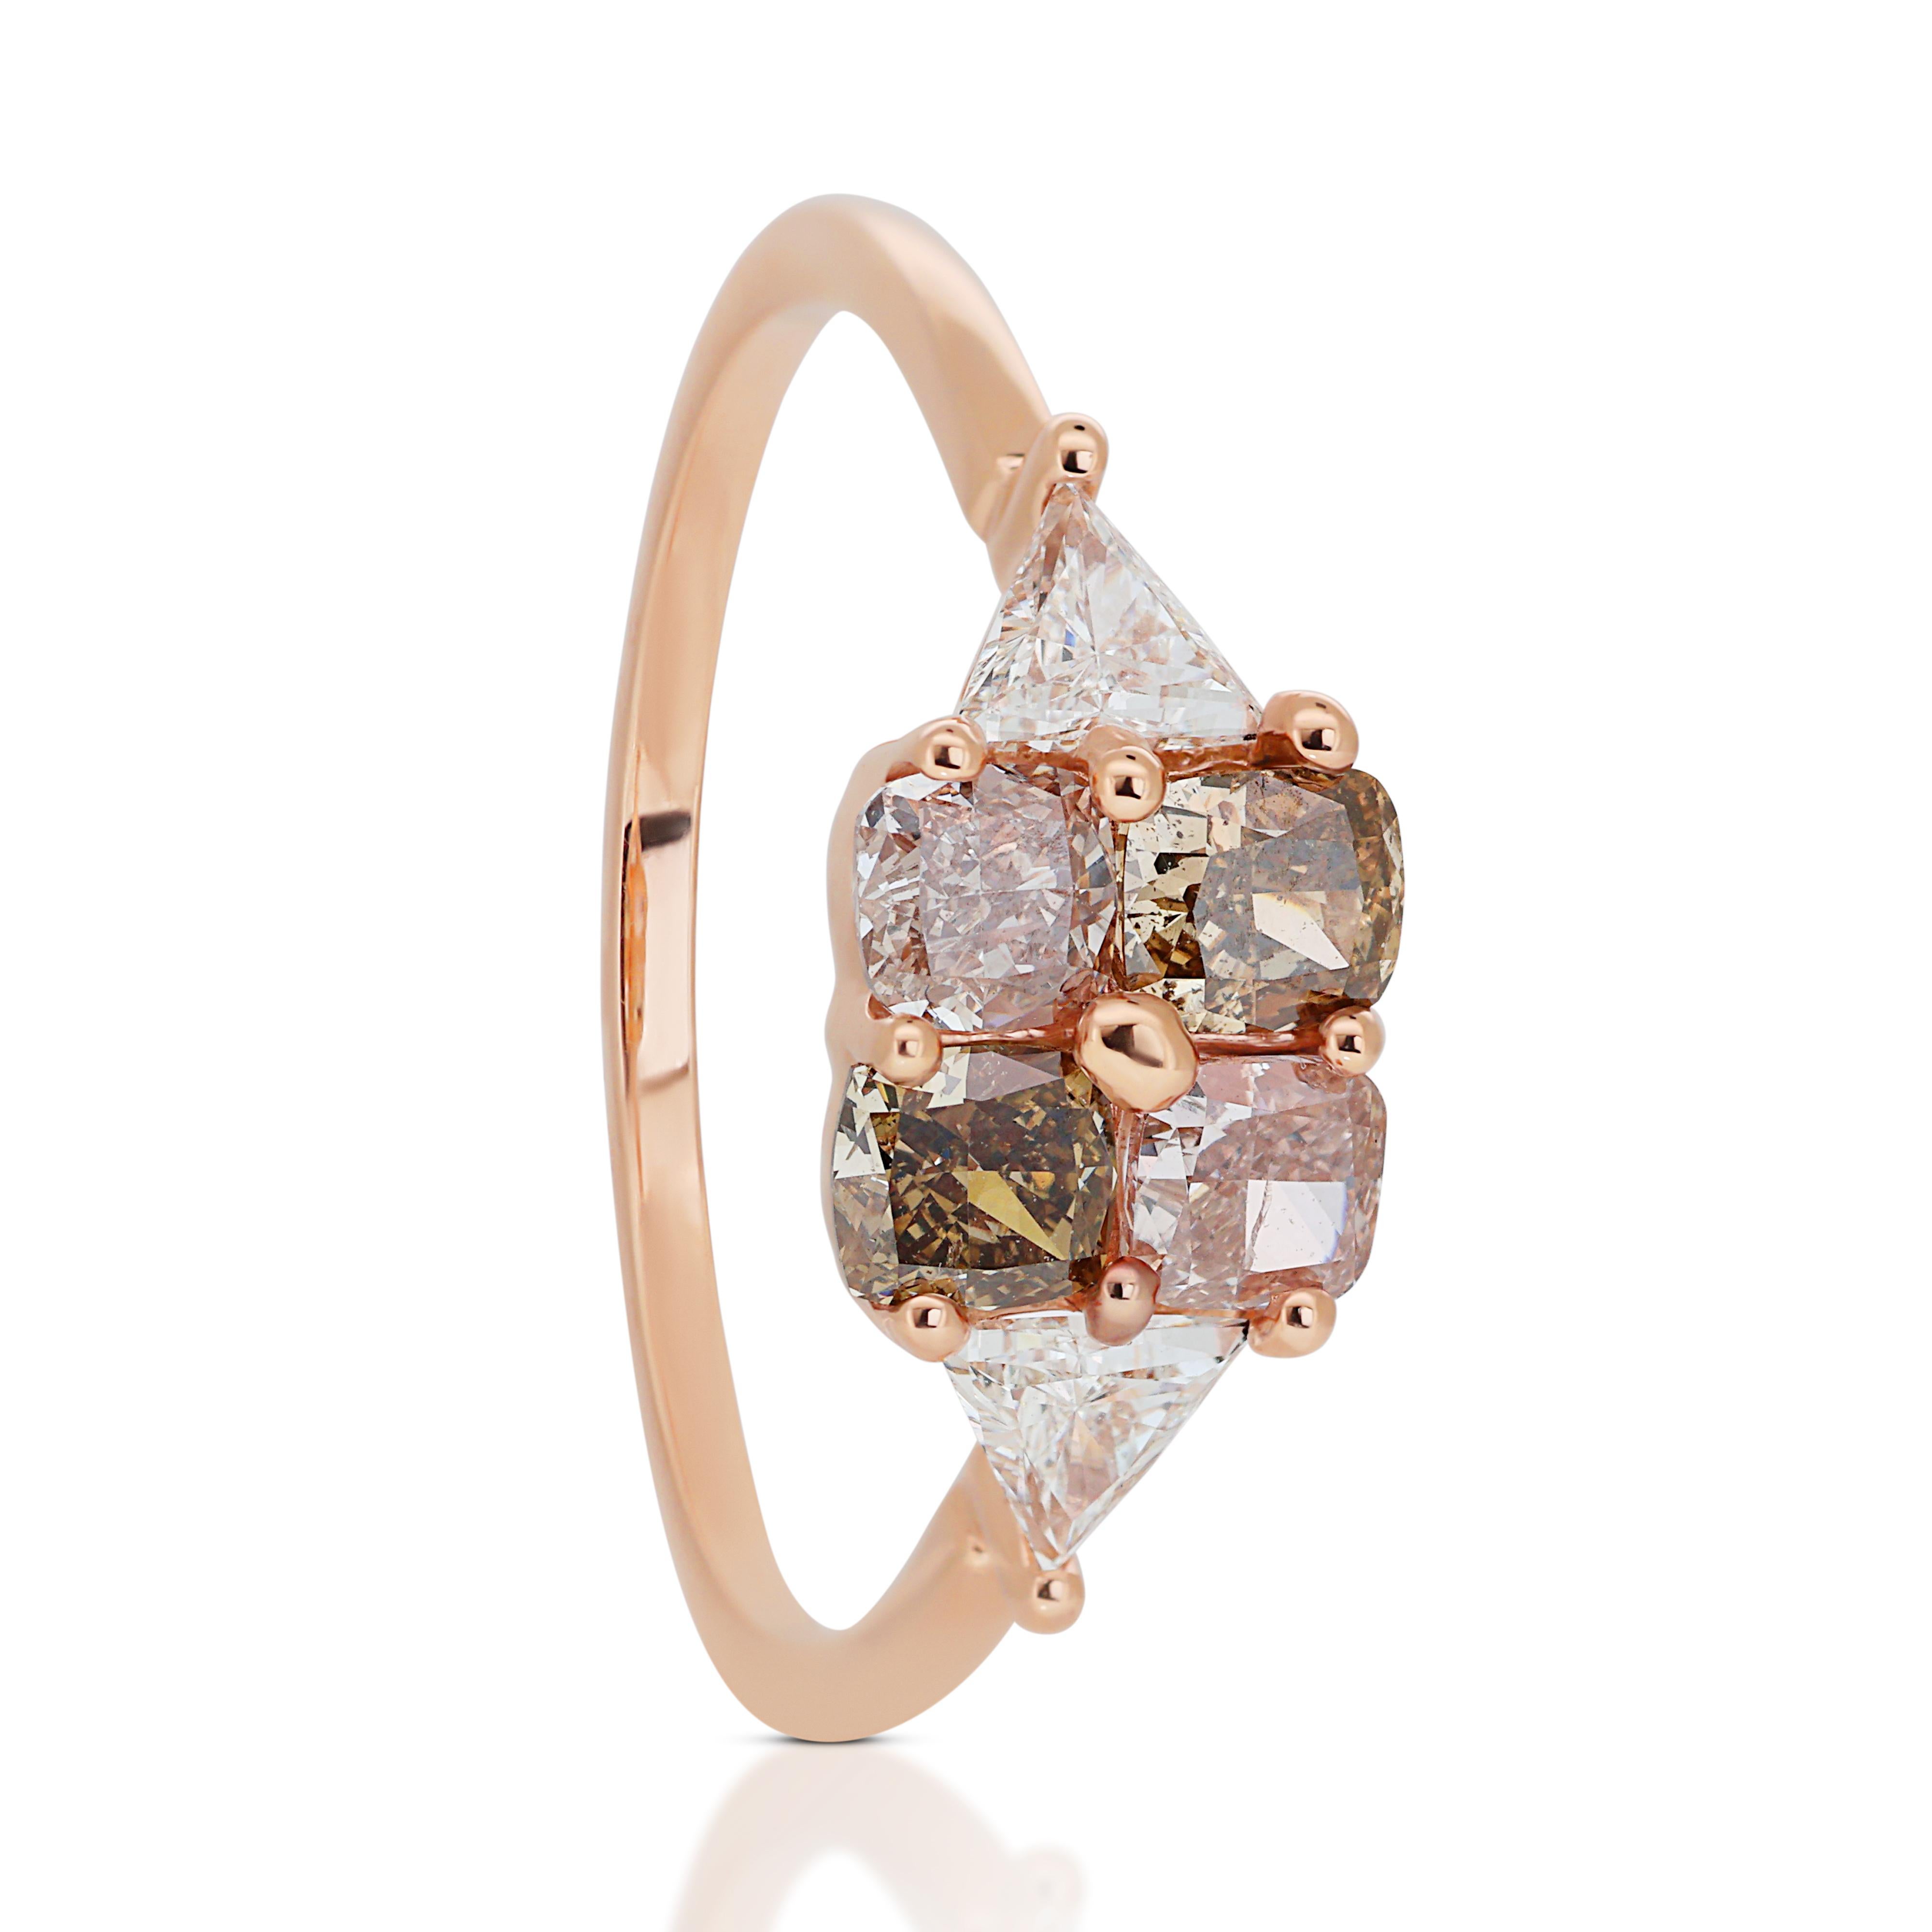 Cushion Cut Vibrant One-of-a-Kind 14k Rose Gold Fancy-Colored Diamond Ring w/1.31 ct  For Sale